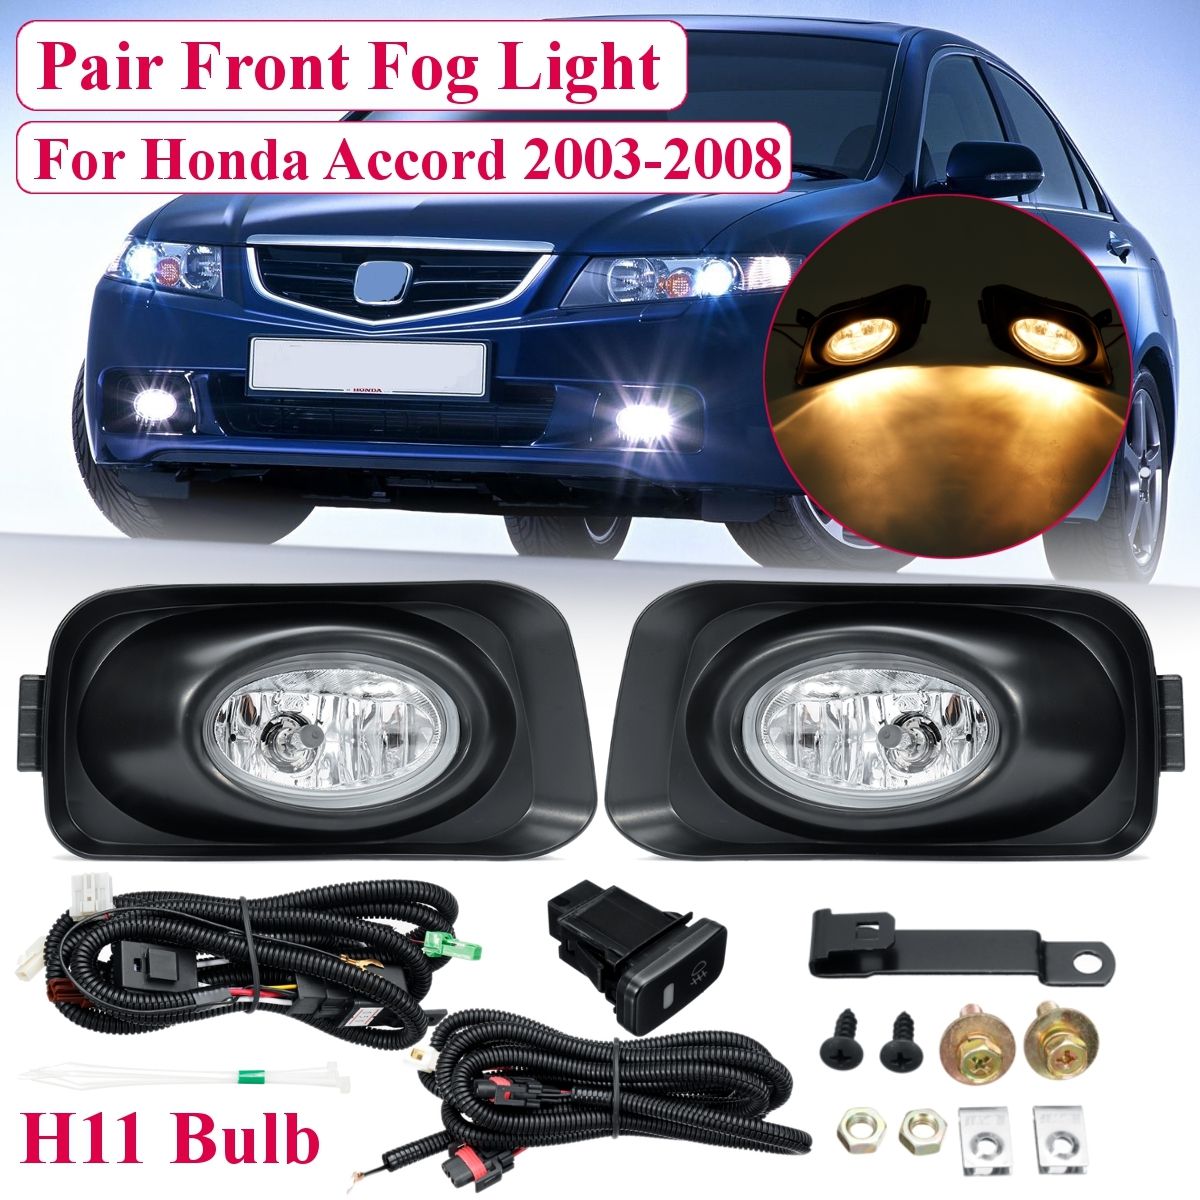 2Pcs-Car-Front-Bumper-Fog-Lights-Auto-Lamps-H11-Bulb-12V-With-Covers-Kit-For-Honda-Accord-2003-2008-1674205